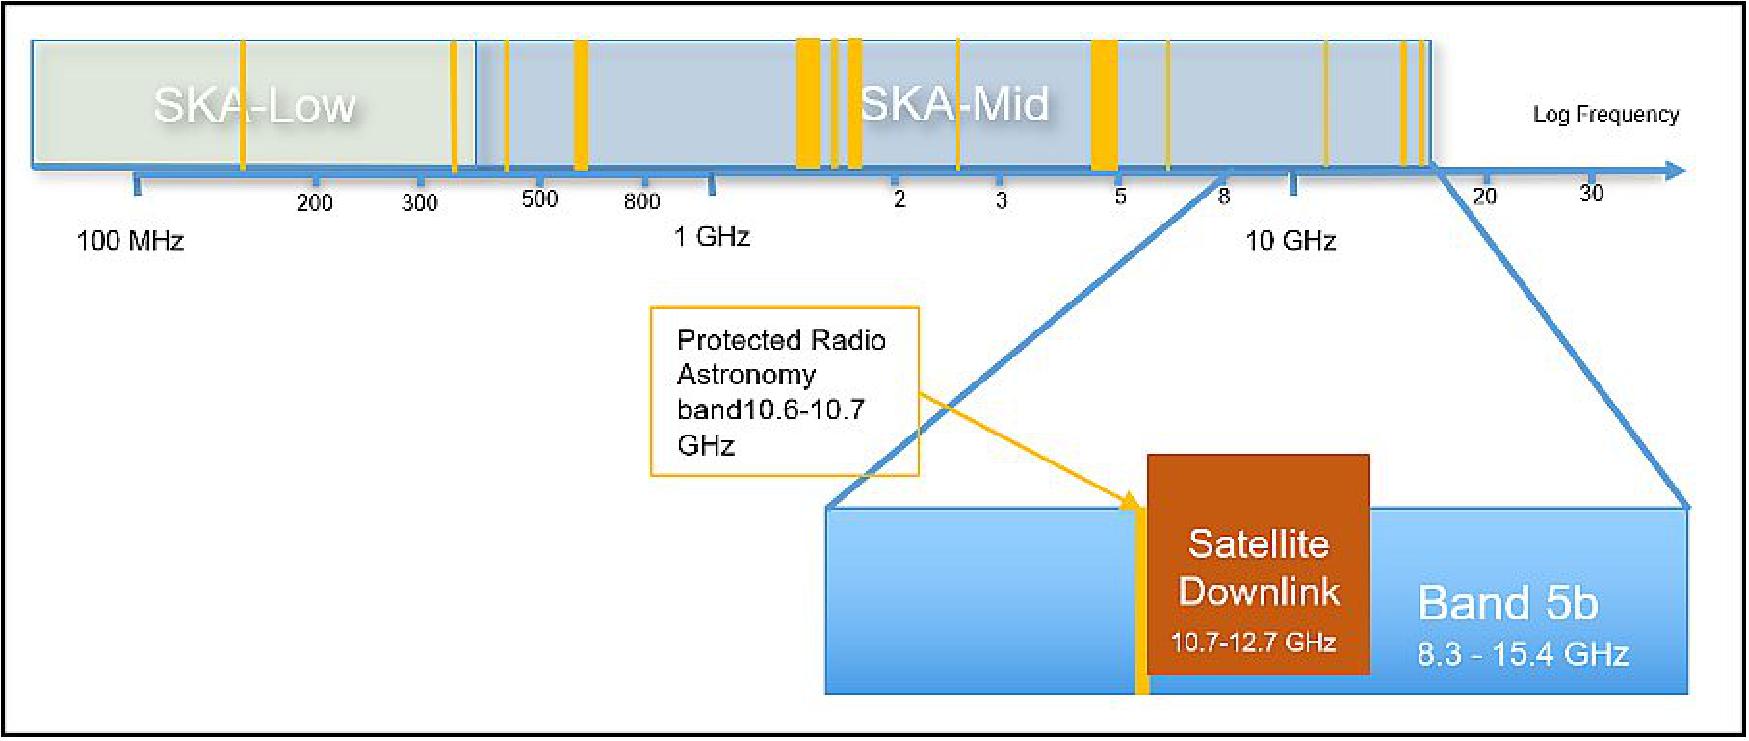 Figure 15: Frequency coverage of the SKAO telescopes with a zoom on SKA-Mid Band 5B, protected radio astronomy band and satellite downlink (image credit: SKAO)